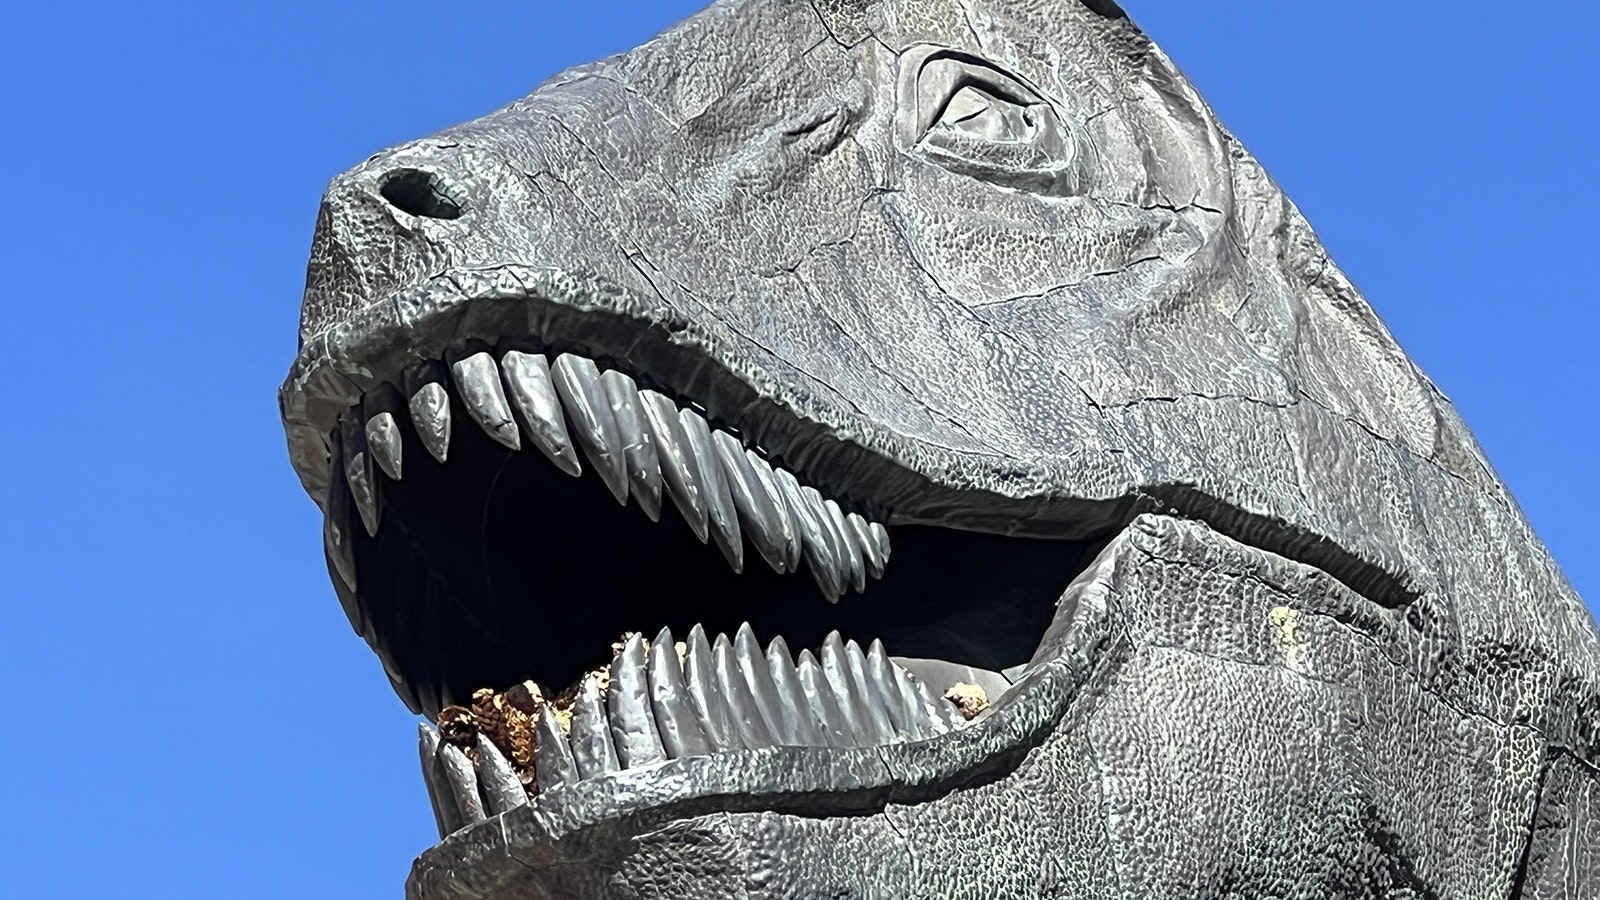 The mouth of a life-sized Tyrannosaurus rex statue on the University of Wyoming campus is almost always full of pinecones, tossed there by students hoping for good grades on exams.